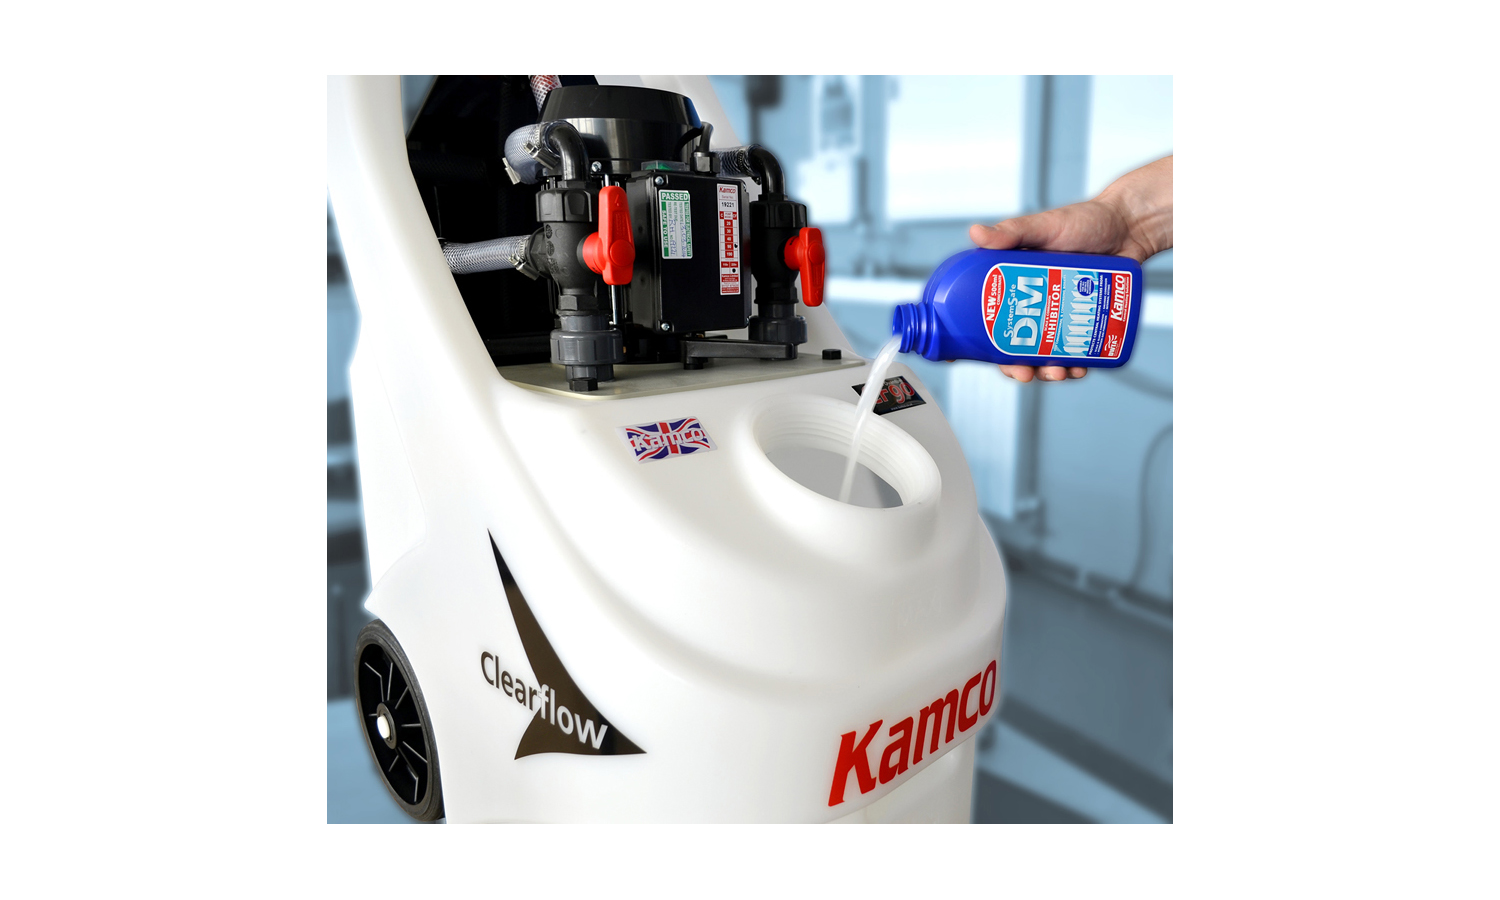 Kamco water treatment products